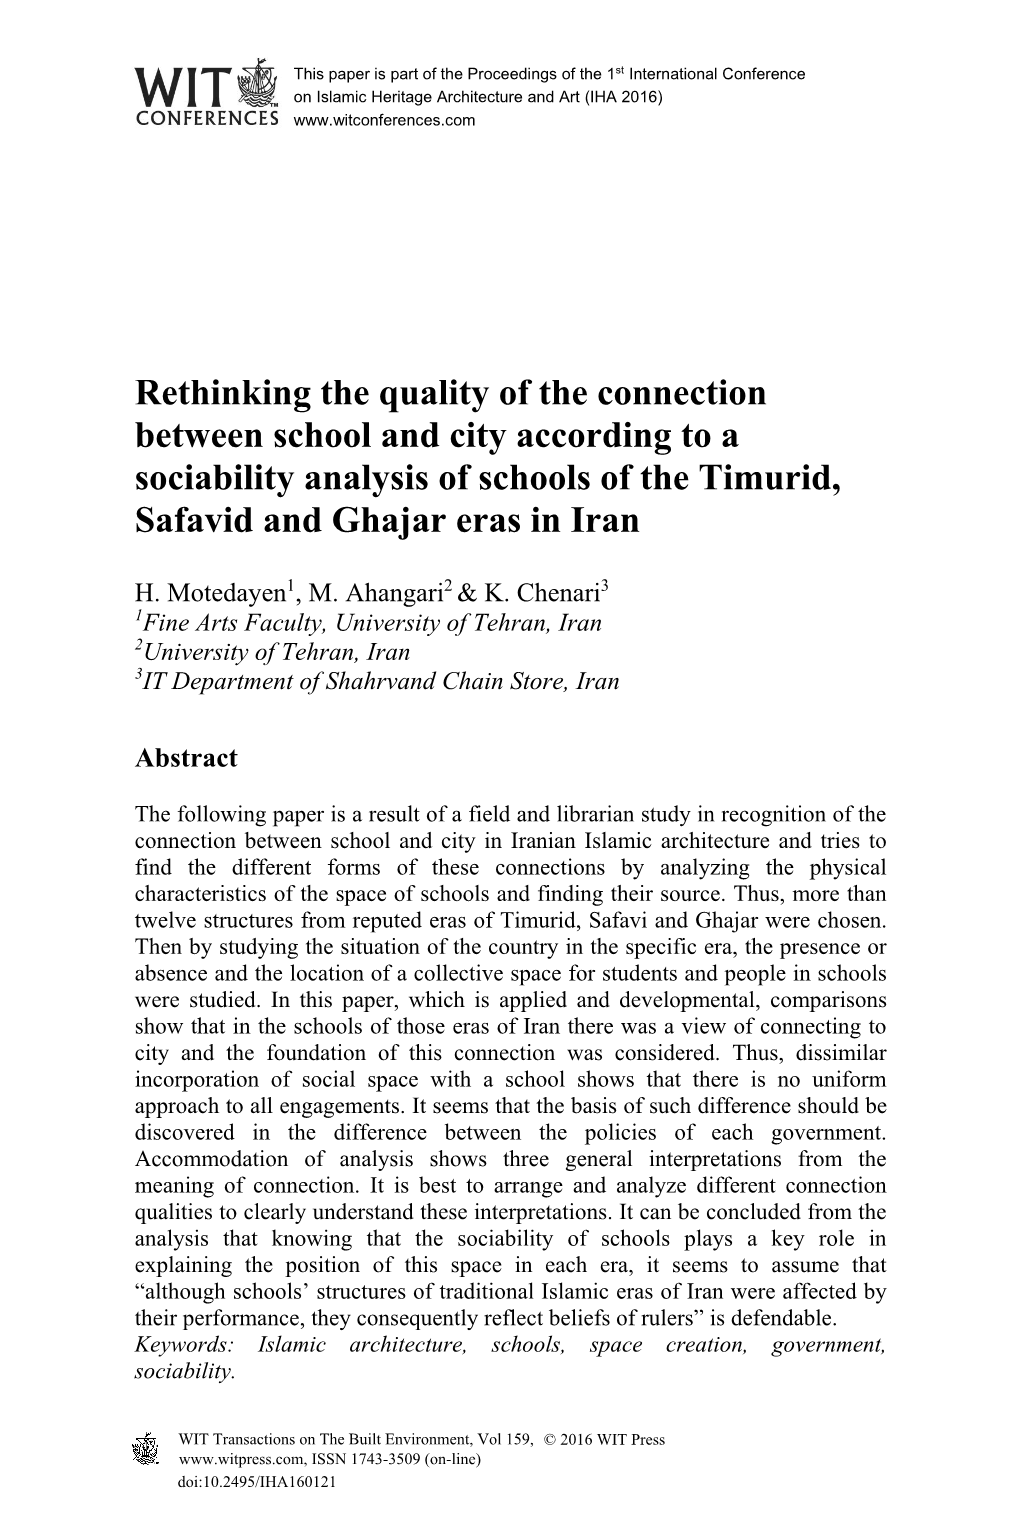 Rethinking the Quality of the Connection Between School and City According to a Sociability Analysis of Schools of the Timurid, Safavid and Ghajar Eras in Iran